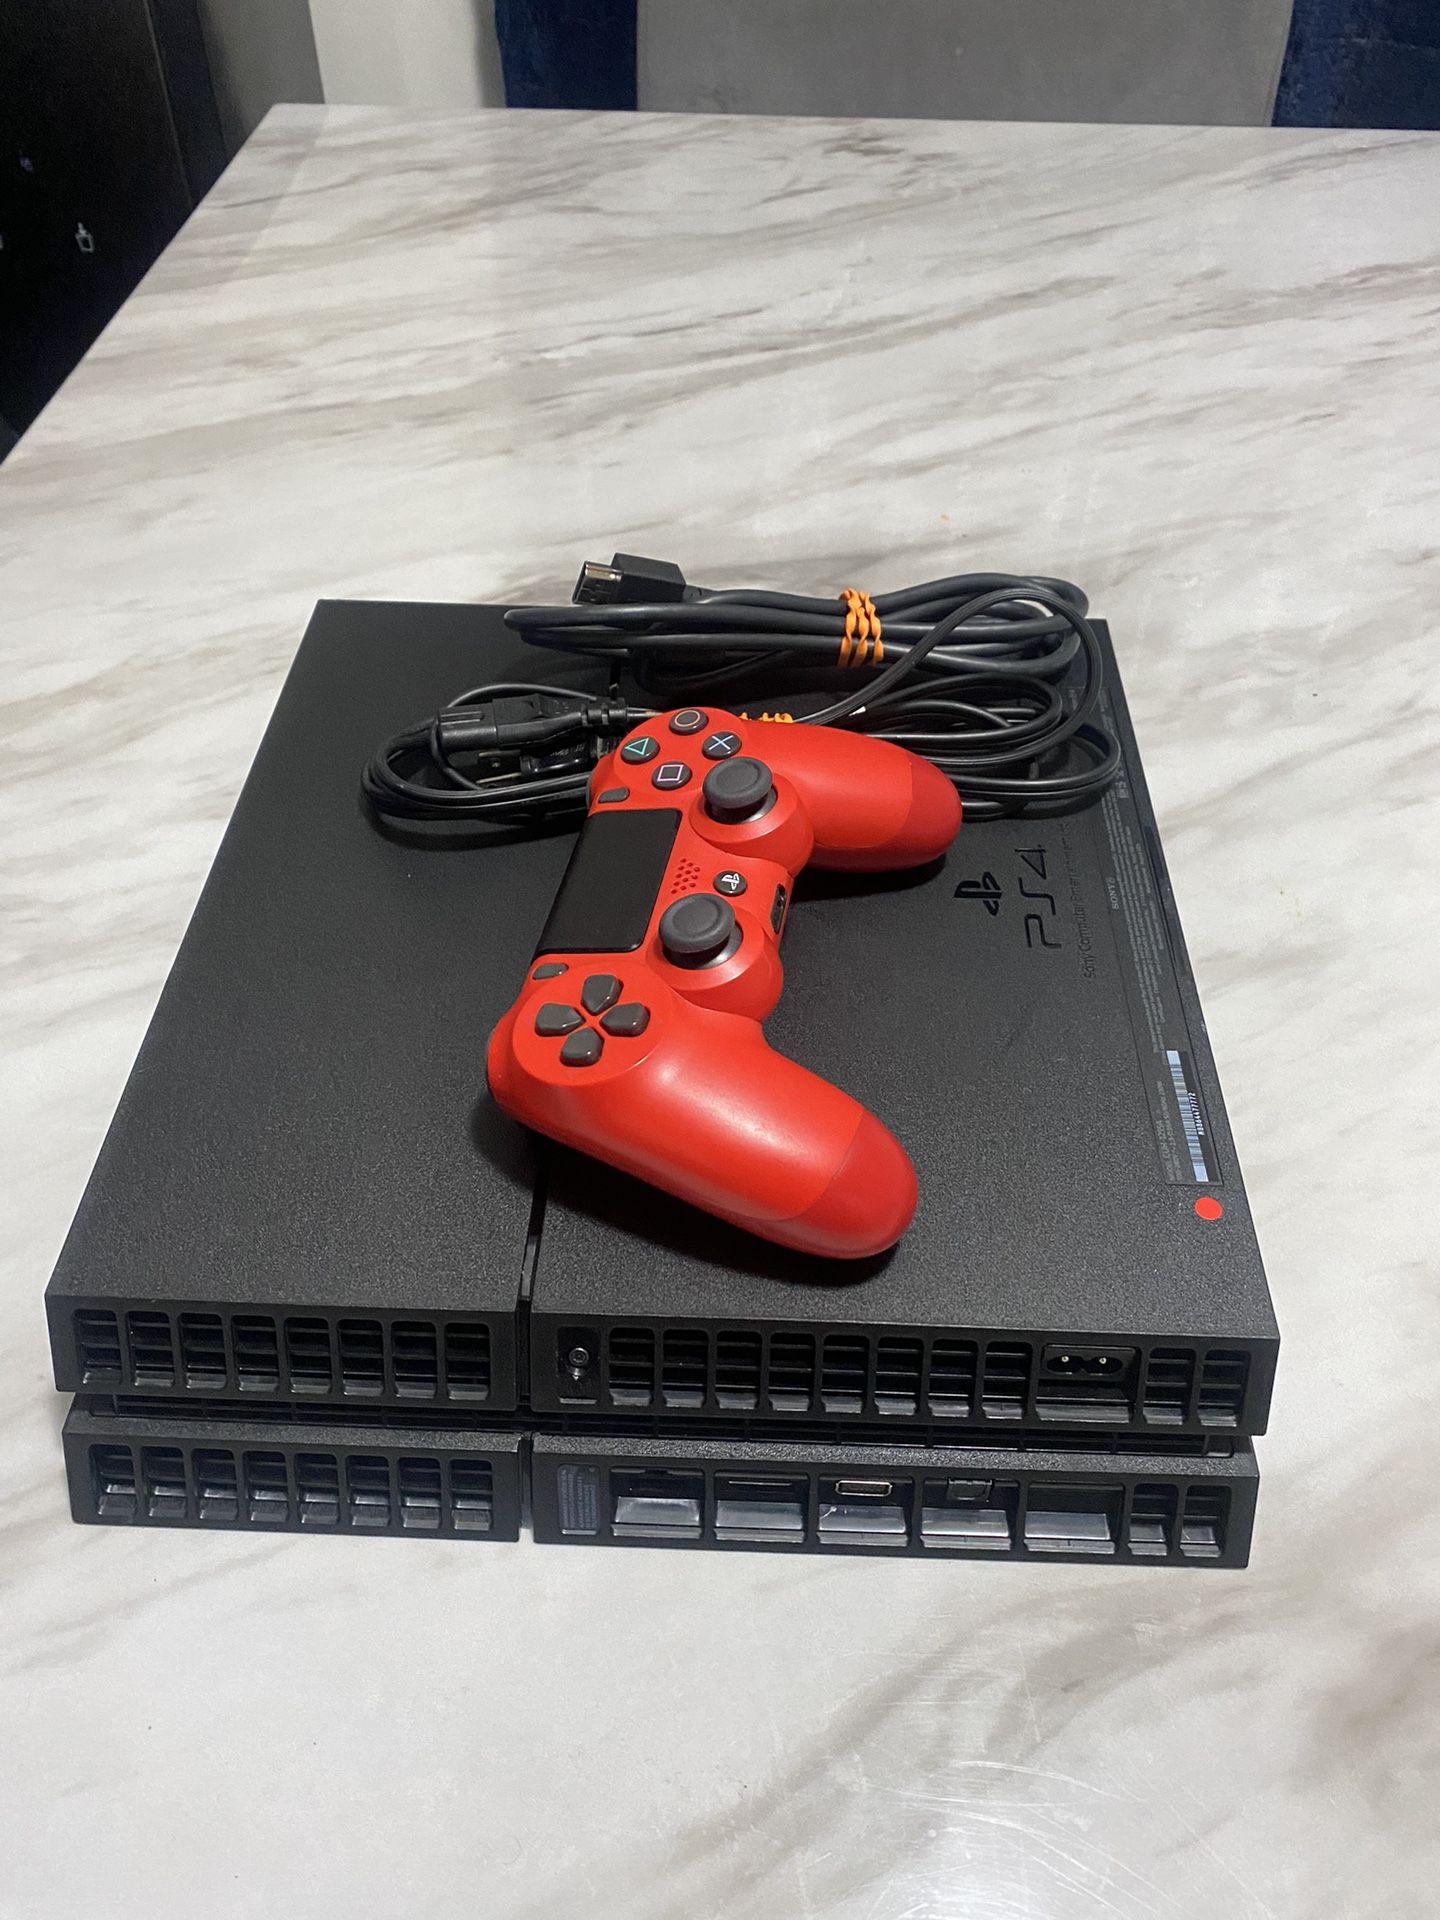 Play station 4 500 GB for $140